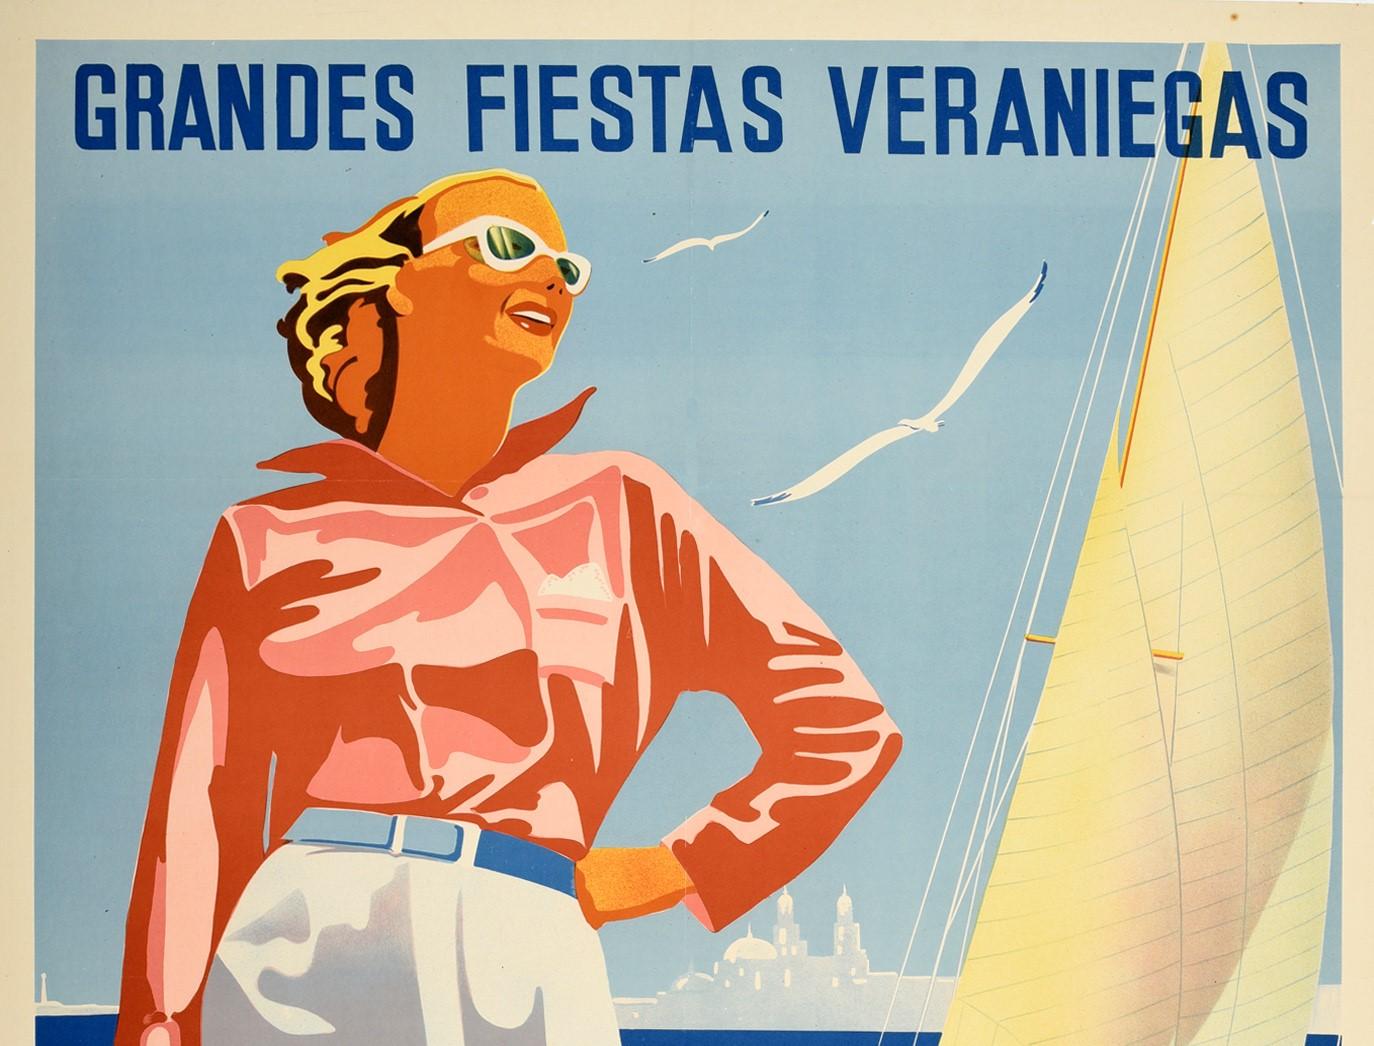 Original vintage travel poster for Great Summer holidays Cadiz The best beach in the South / Grandes fiestas veraniegas Cadiz la mejor playa del sur featuring a great image of a smiling lady in fashionable sunglasses holding a sun hat with her short